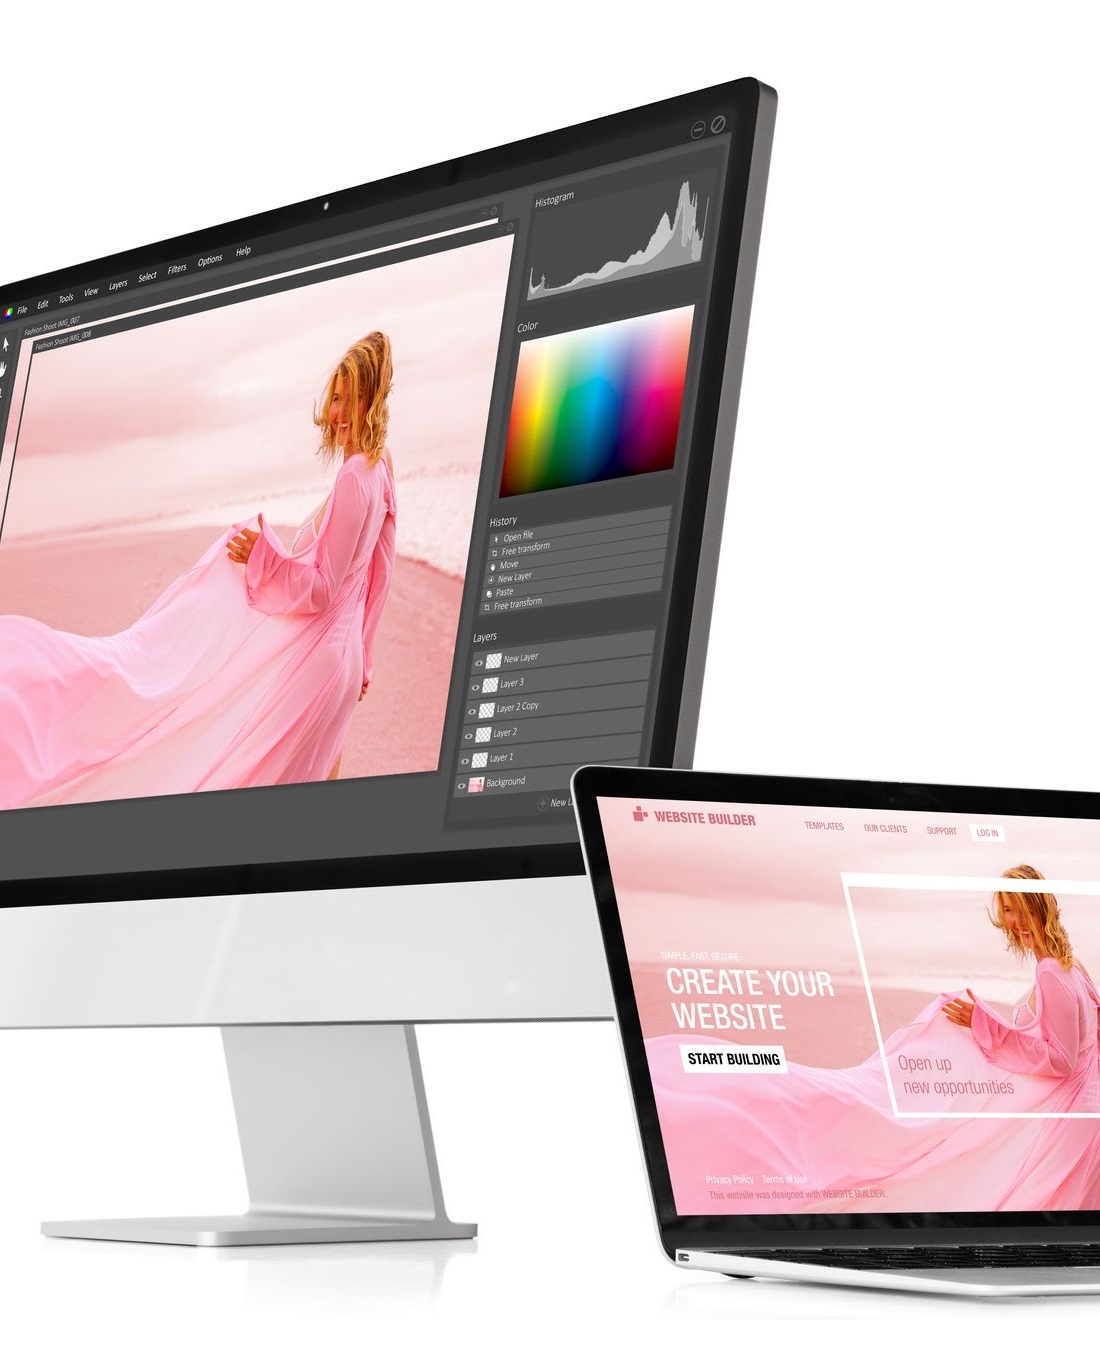 Image editing software showing a woman in a pink gown on a beach